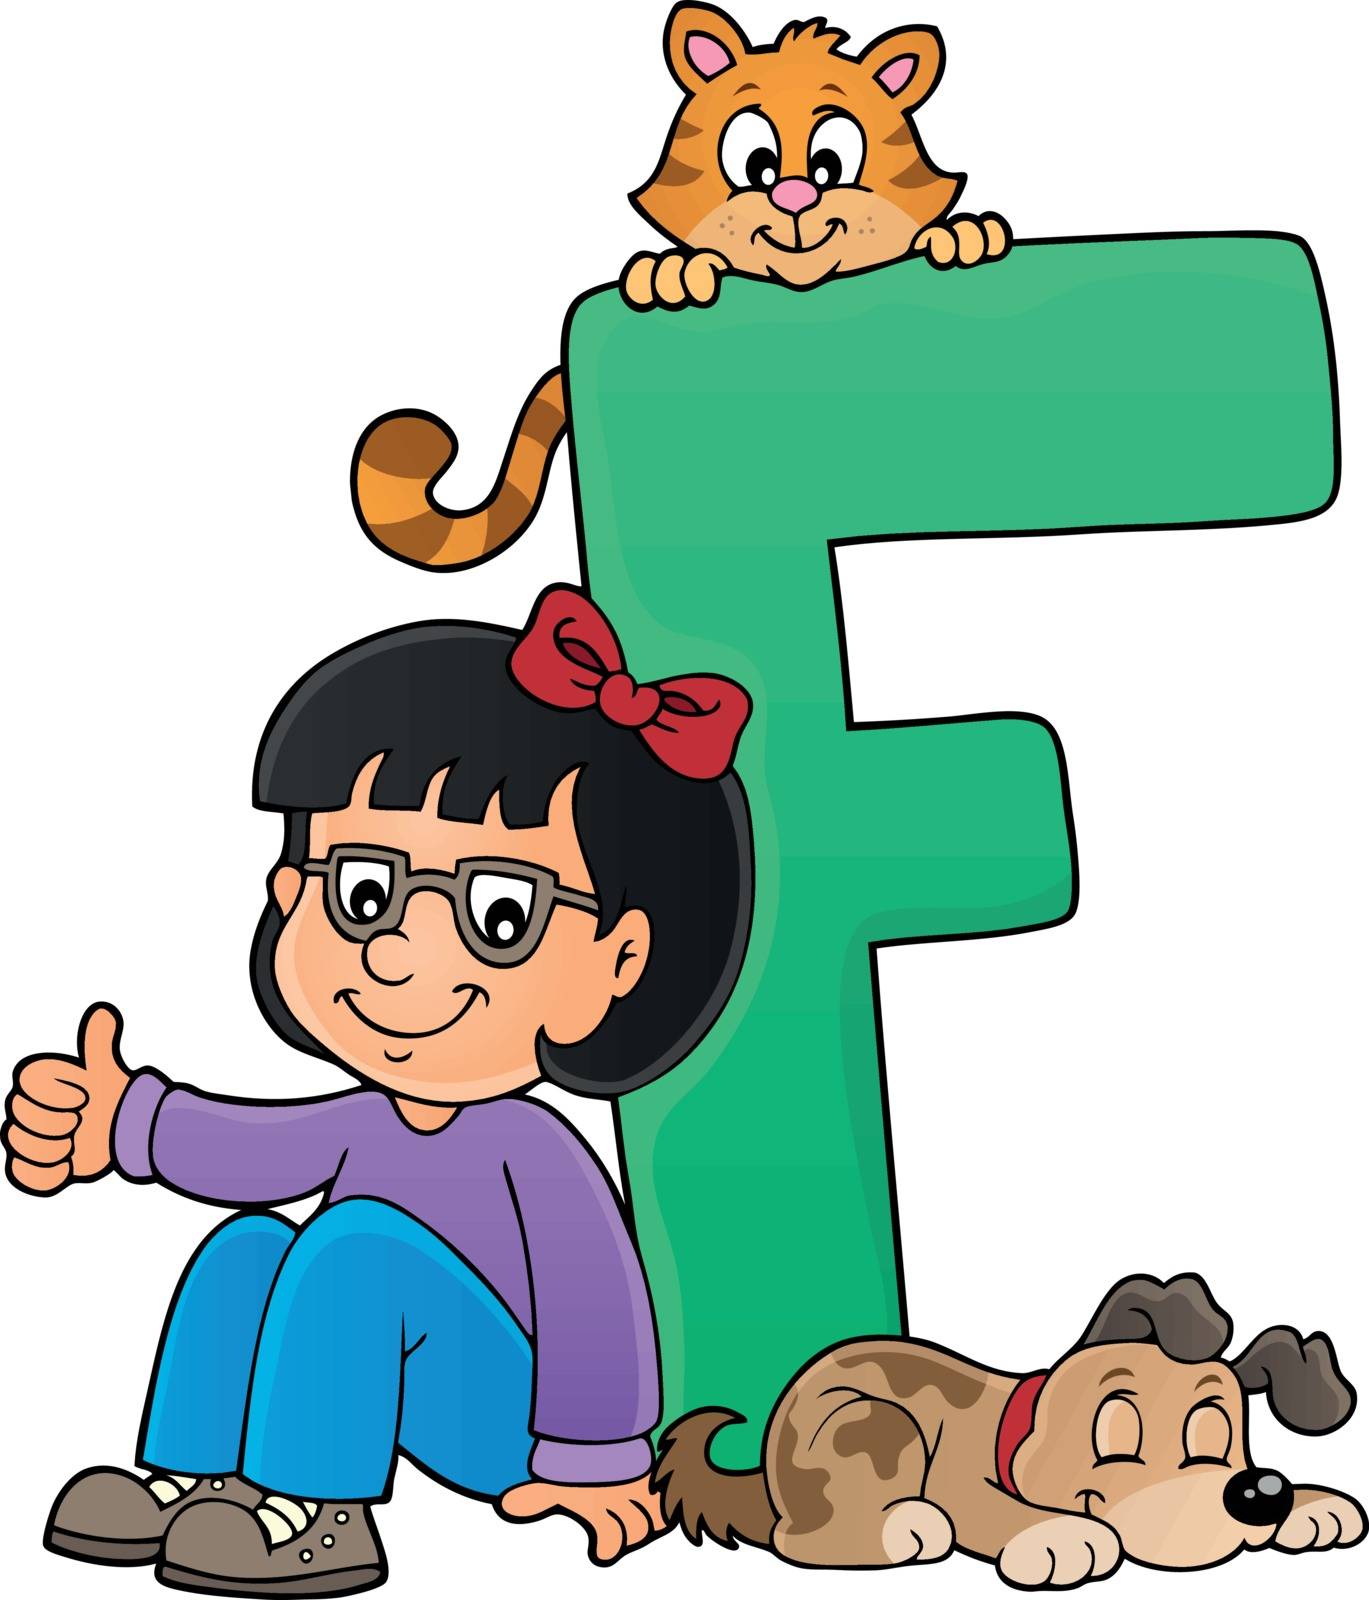 Girl and pets with letter F - eps10 vector illustration.